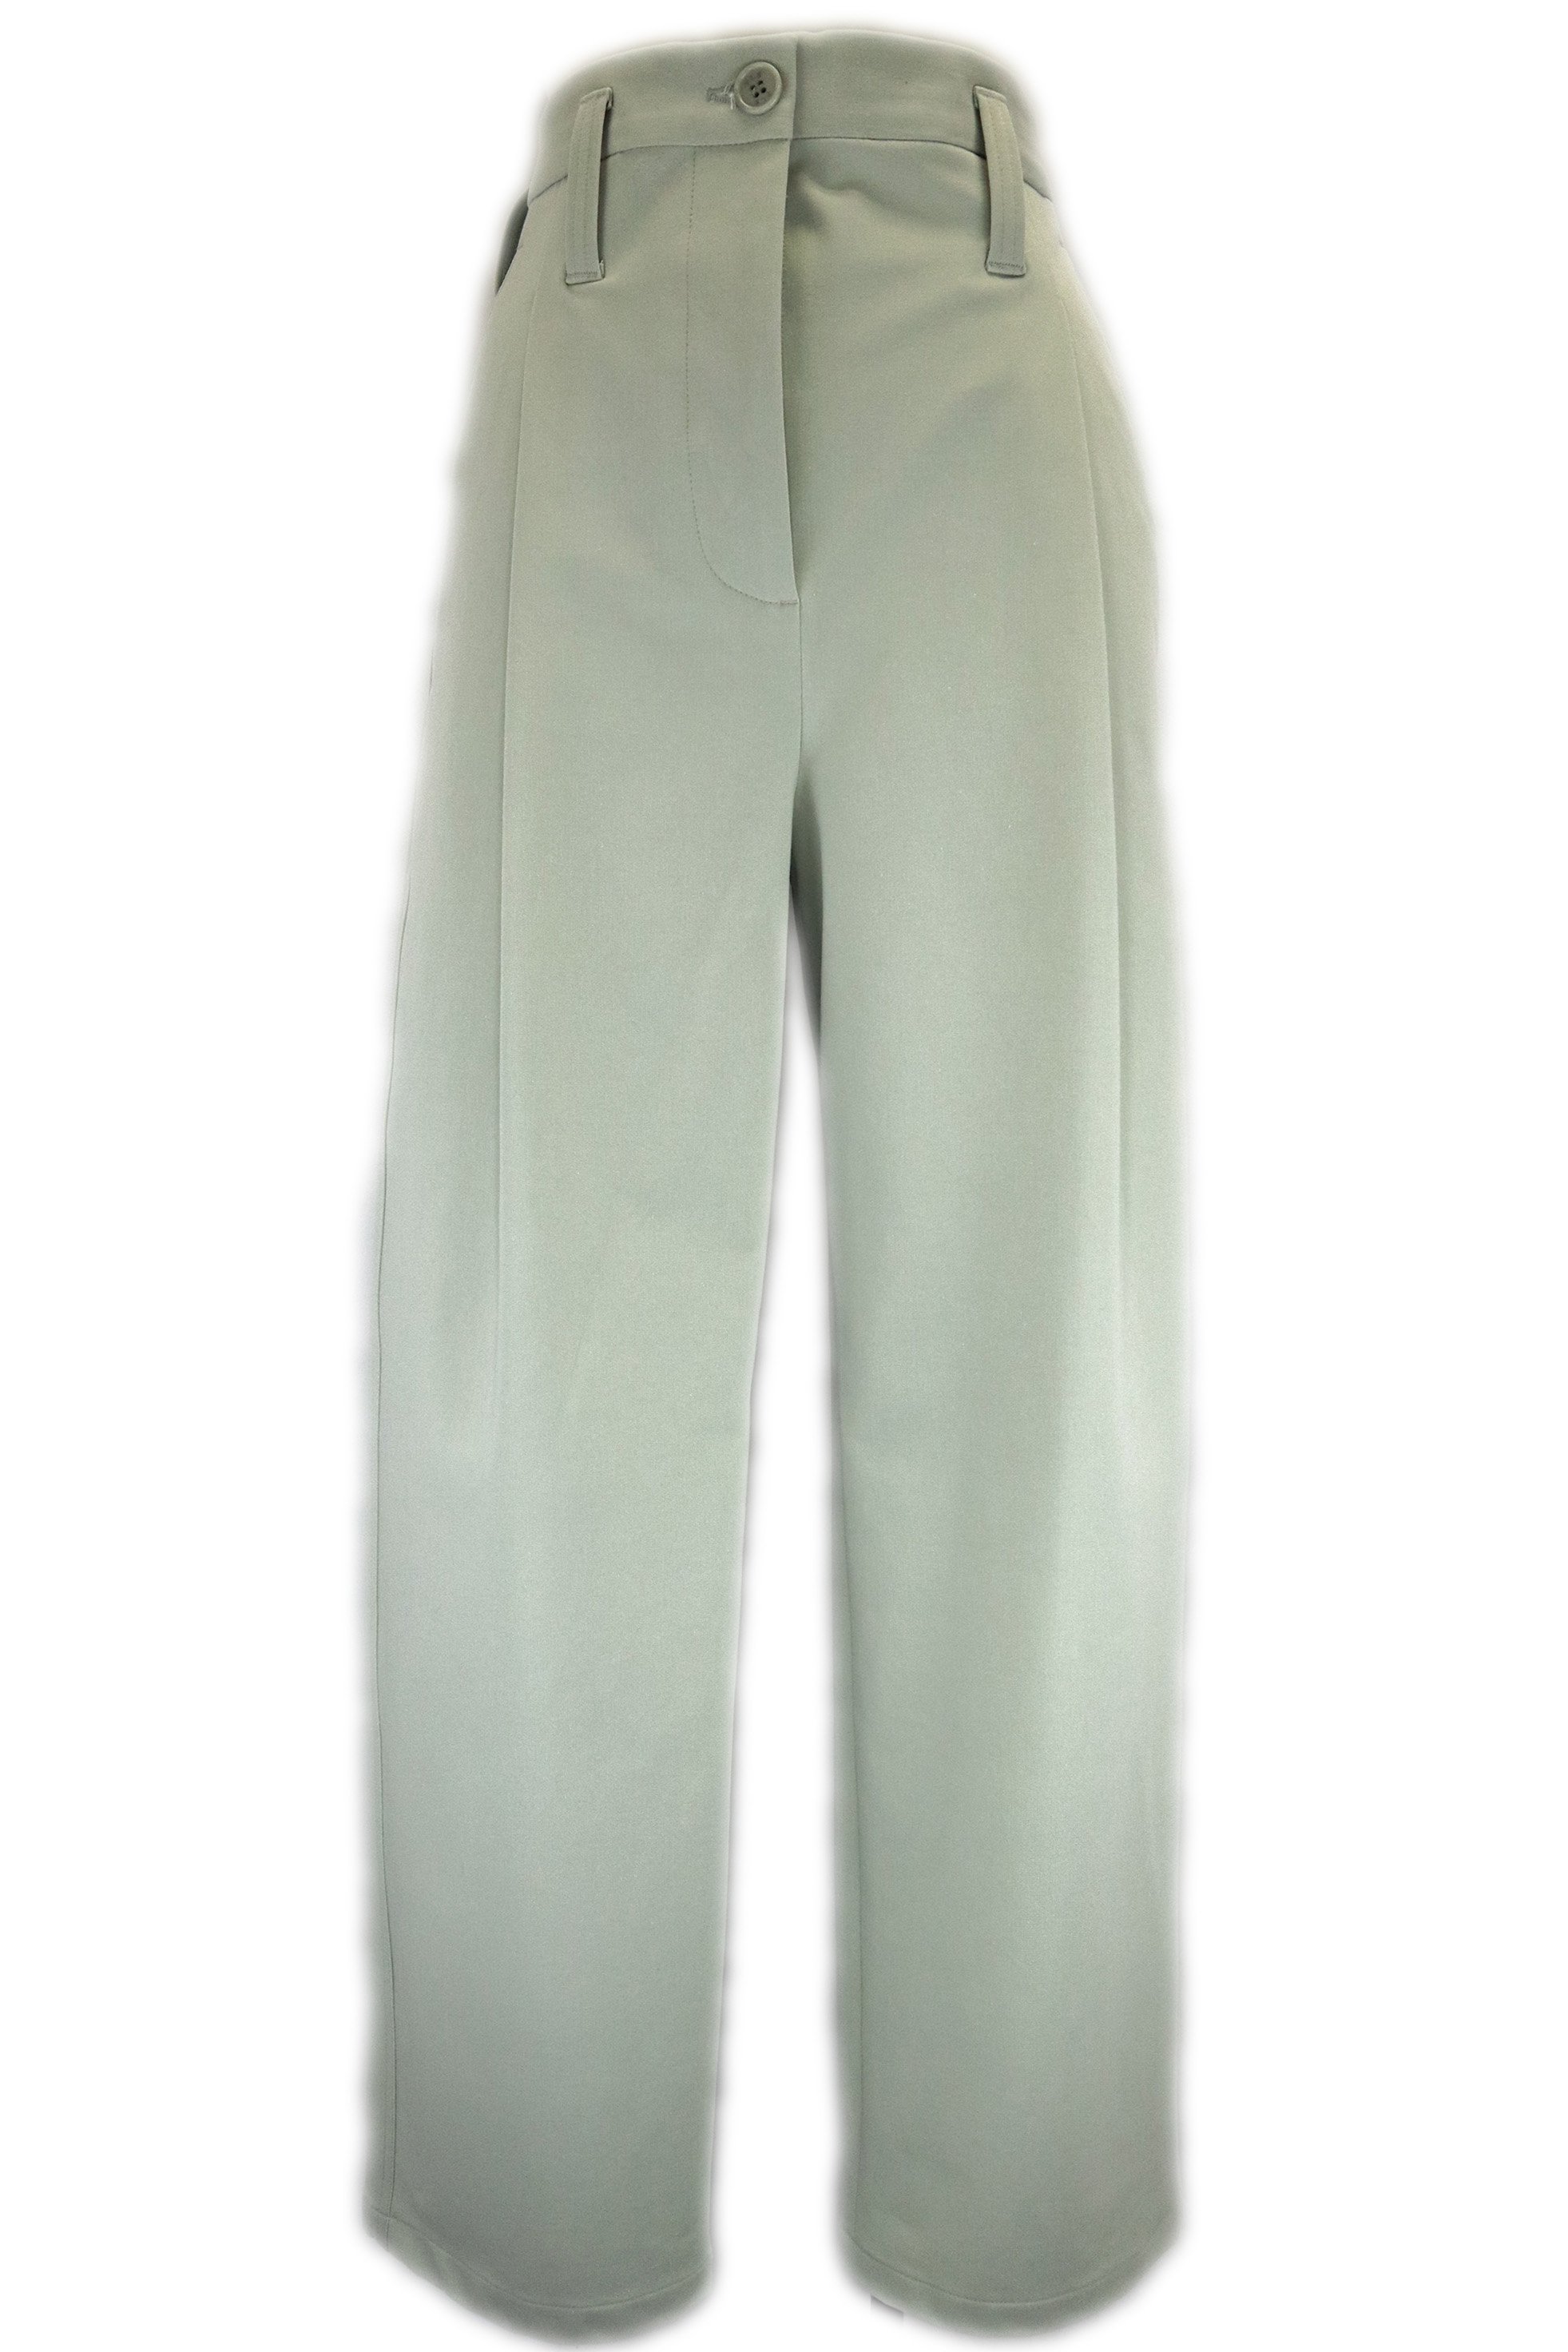 <img class='new_mark_img1' src='https://img.shop-pro.jp/img/new/icons47.gif' style='border:none;display:inline;margin:0px;padding:0px;width:auto;' />PHILOSOPHY Cotton wide trousers (KHAKI)